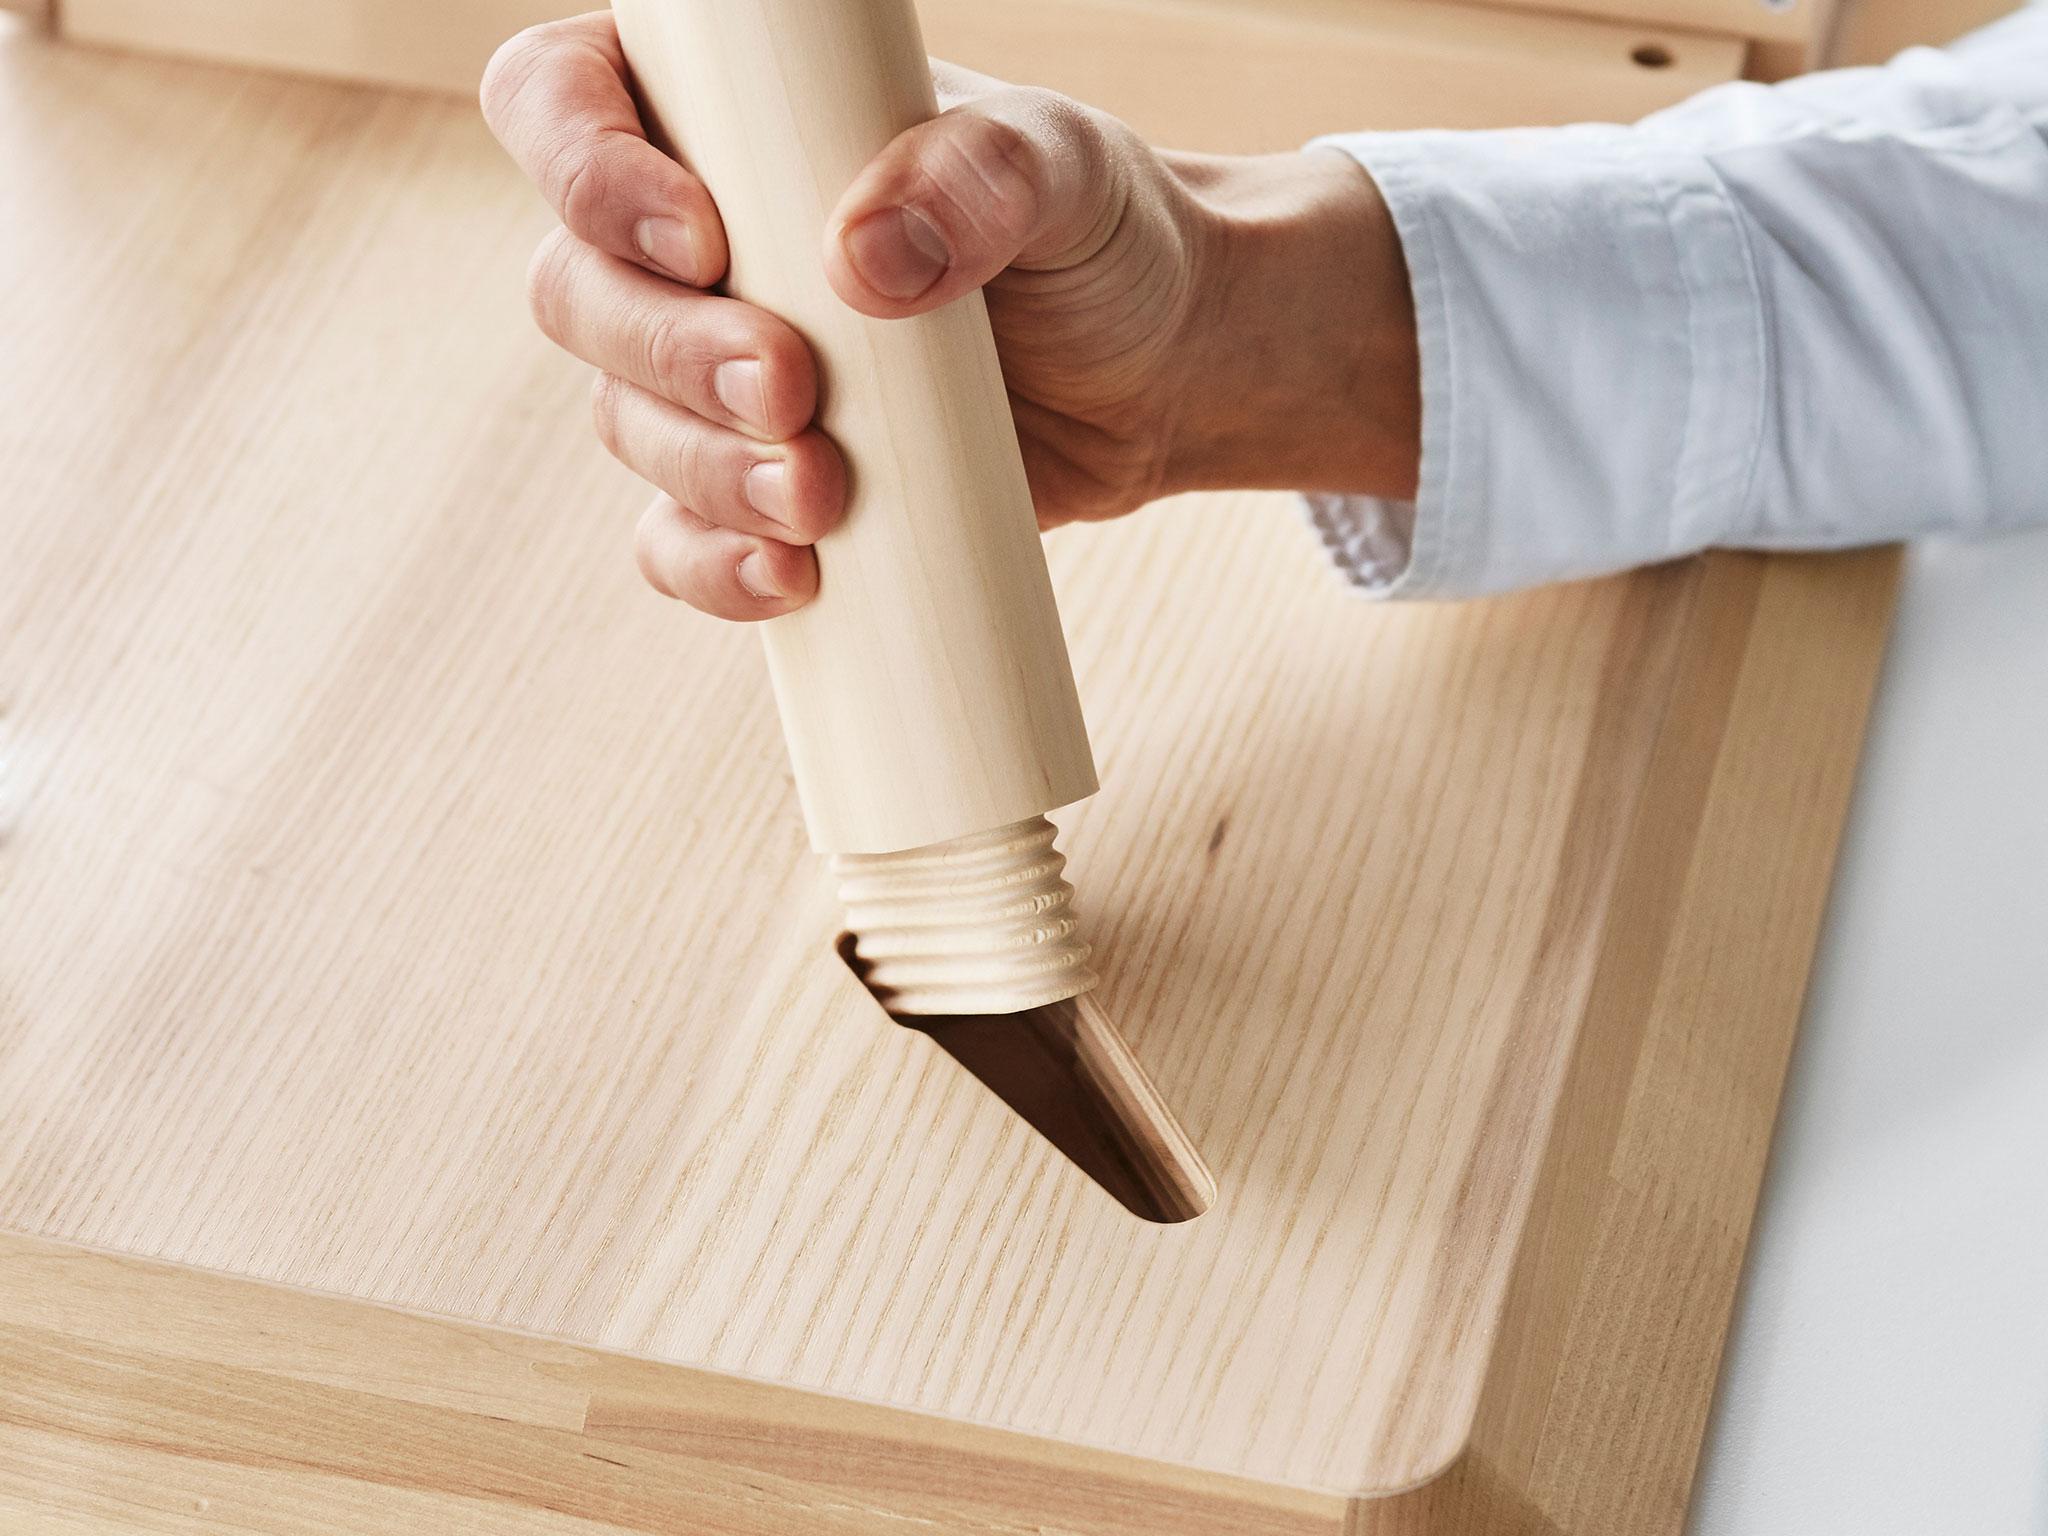 Ikea has developed a new range of products to simplify the assembly of flat-pack furniture